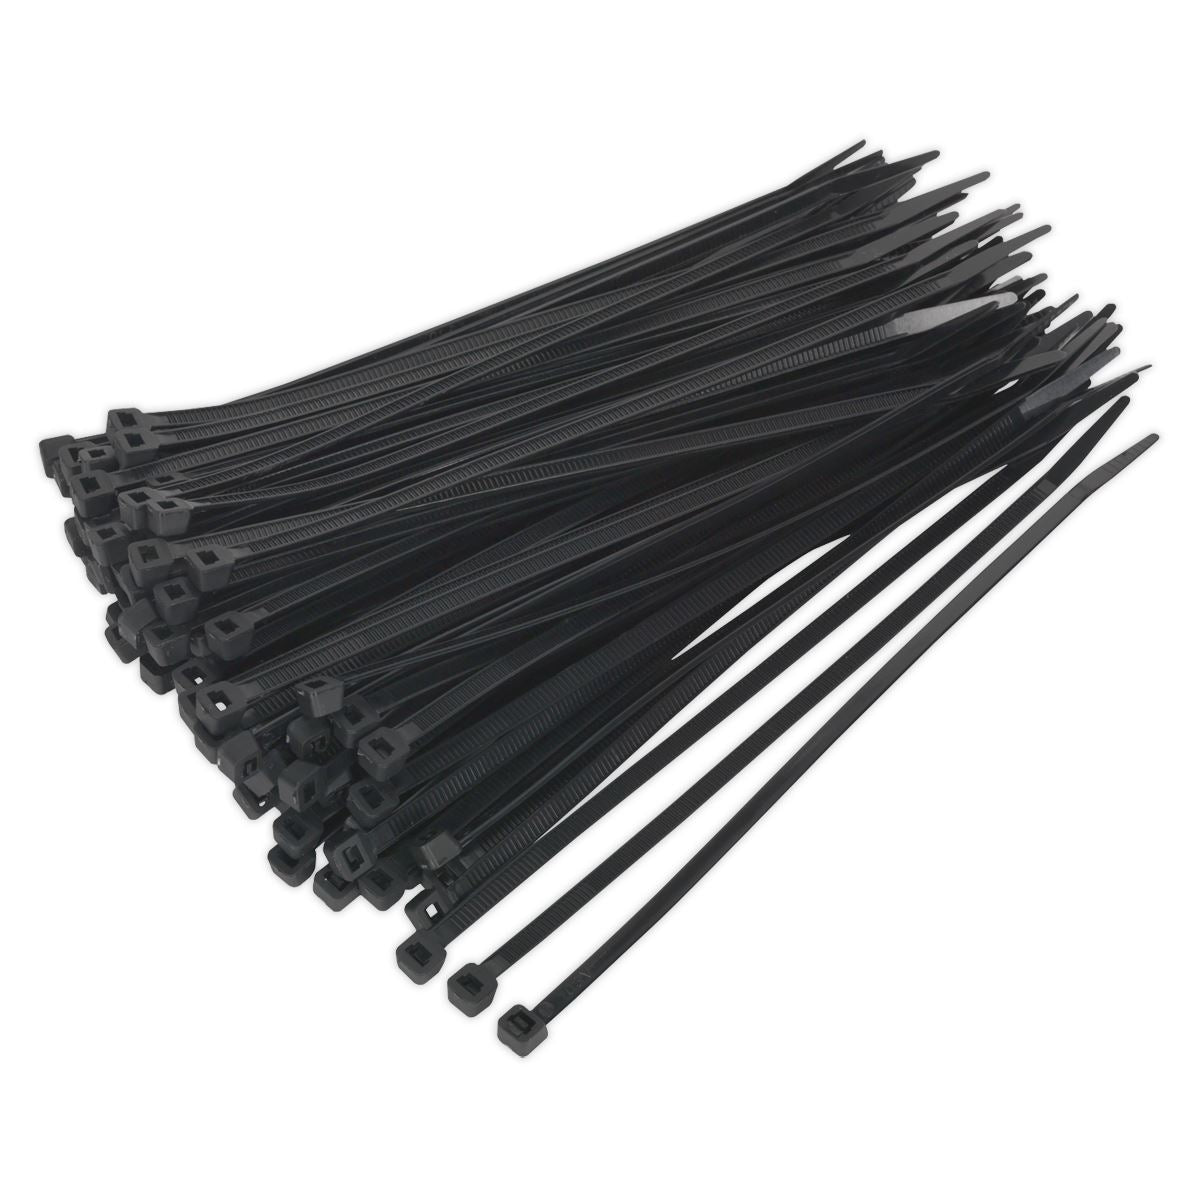 Sealey Cable Tie 200 x 4.8mm Black Pack of 100